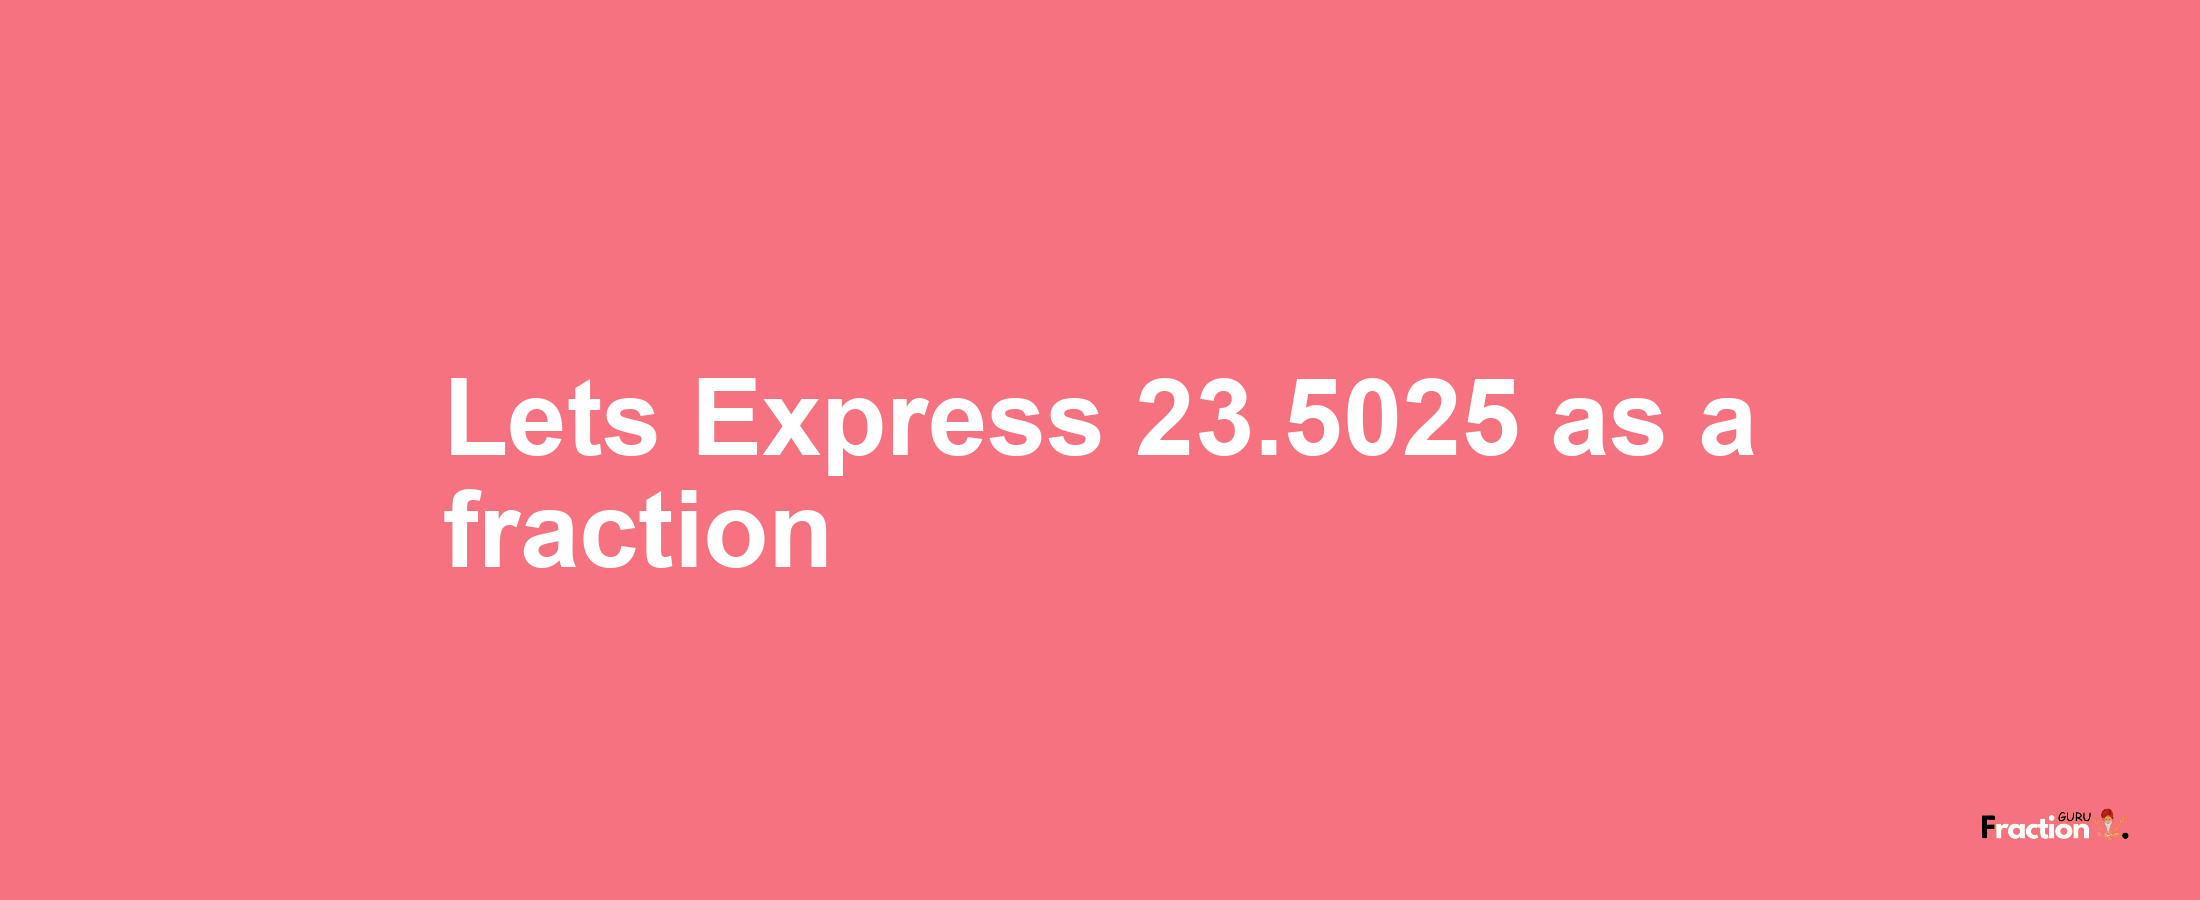 Lets Express 23.5025 as afraction